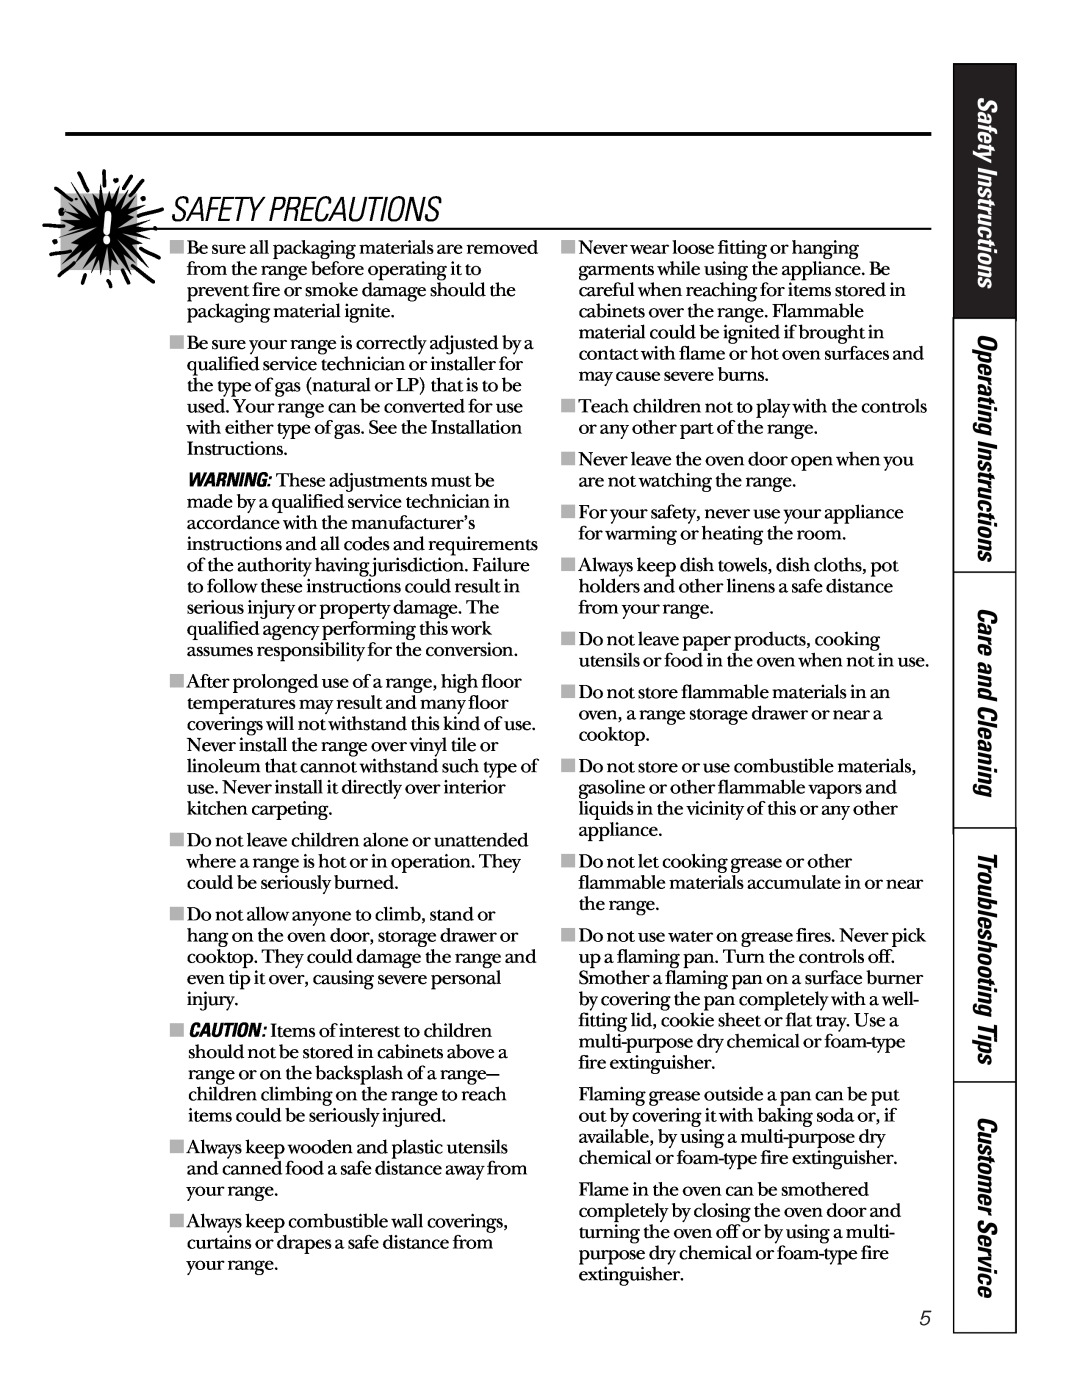 GE JGSP22 owner manual Safety Precautions, Never leave the oven door open when you are not watching the range 